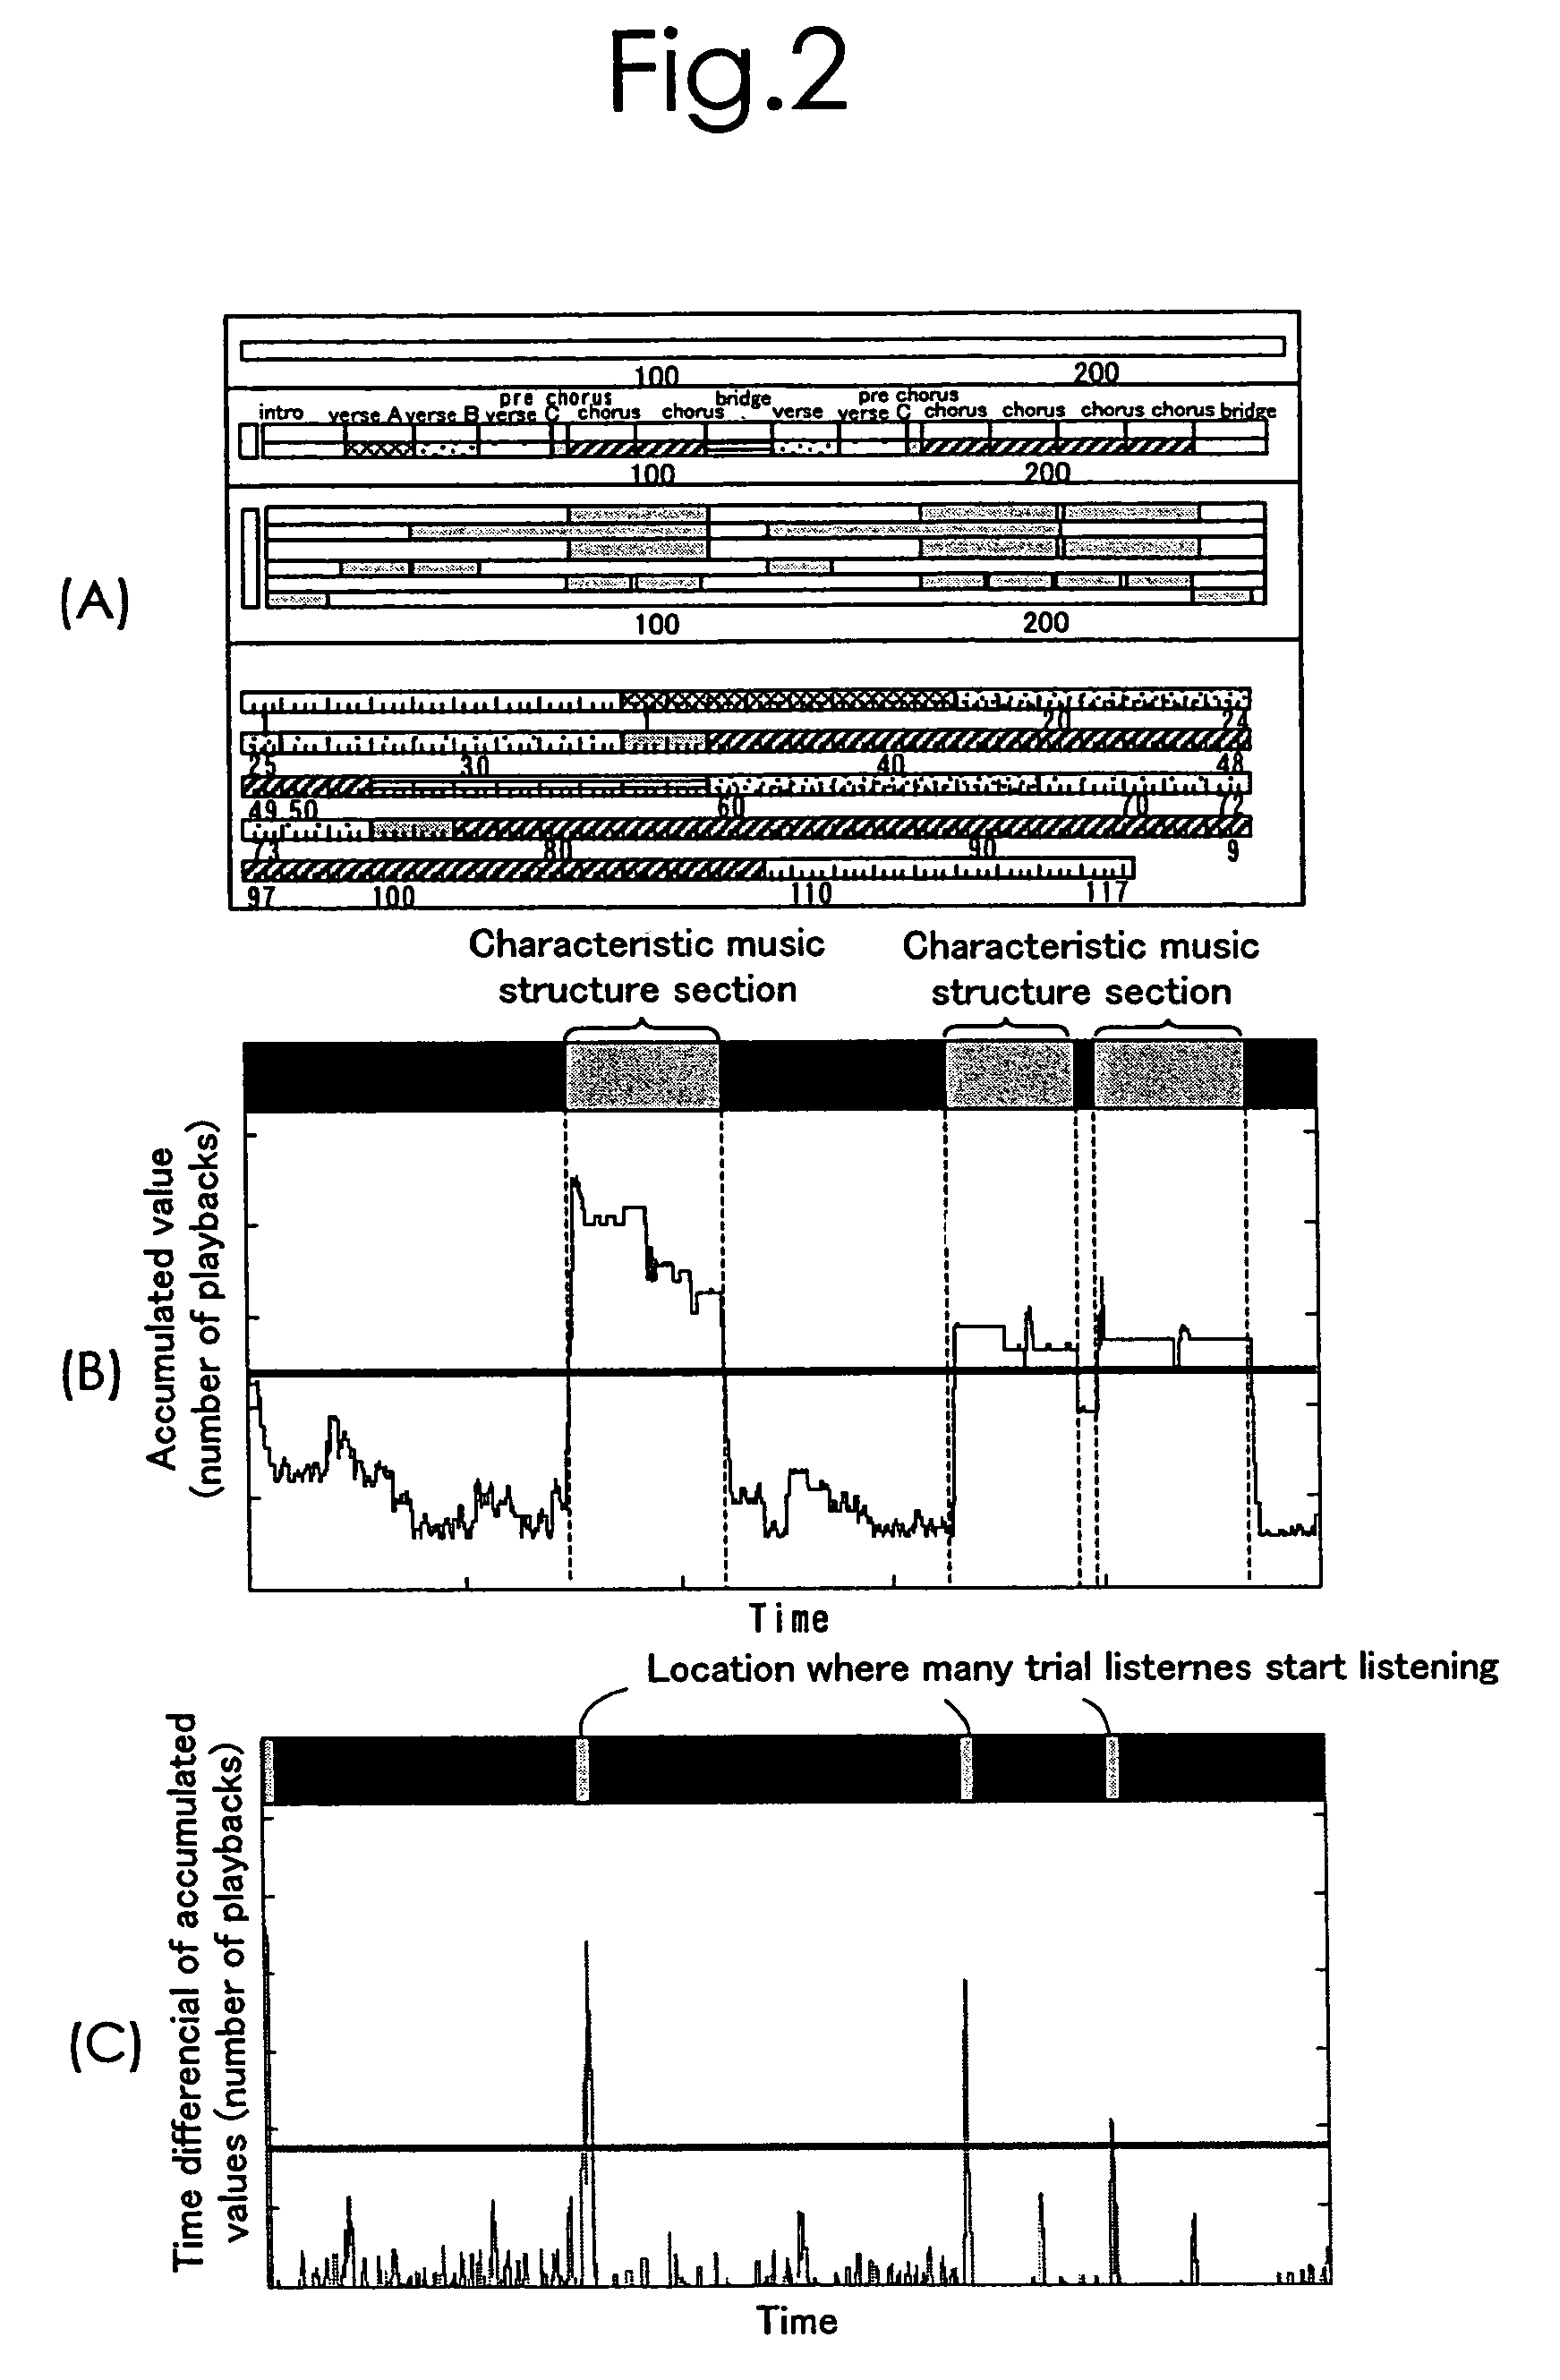 Musical composition reproduction method and device, and method for detecting a representative motif section in musical composition data